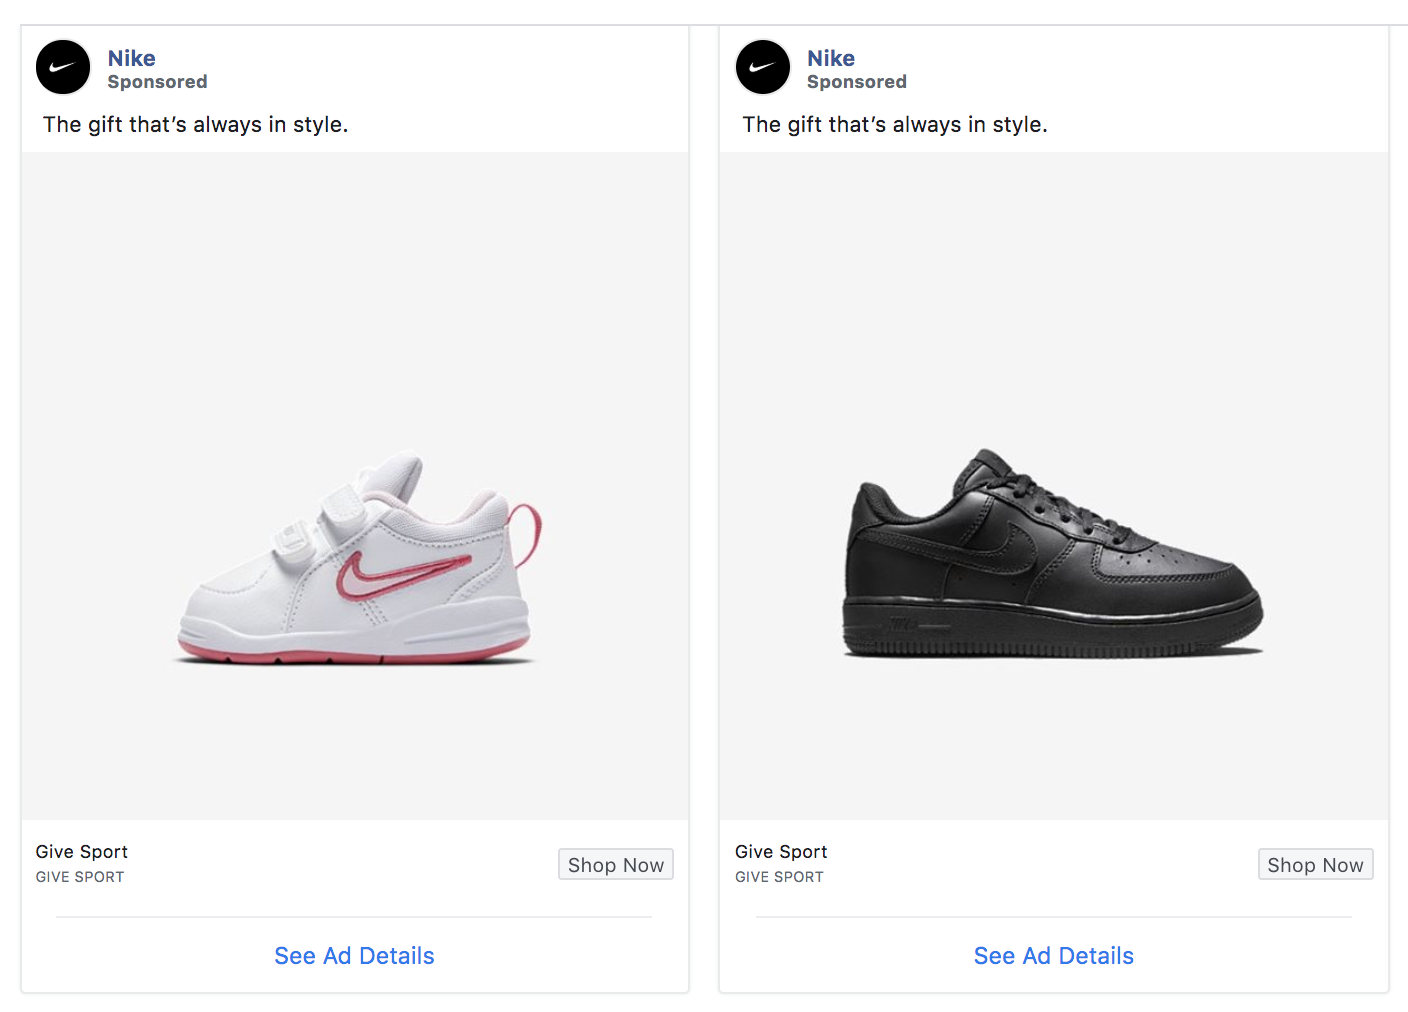 Nike Case Study How Nike Facebook Ads Are Used To Drive Sales Relevantly Facebook Marketing